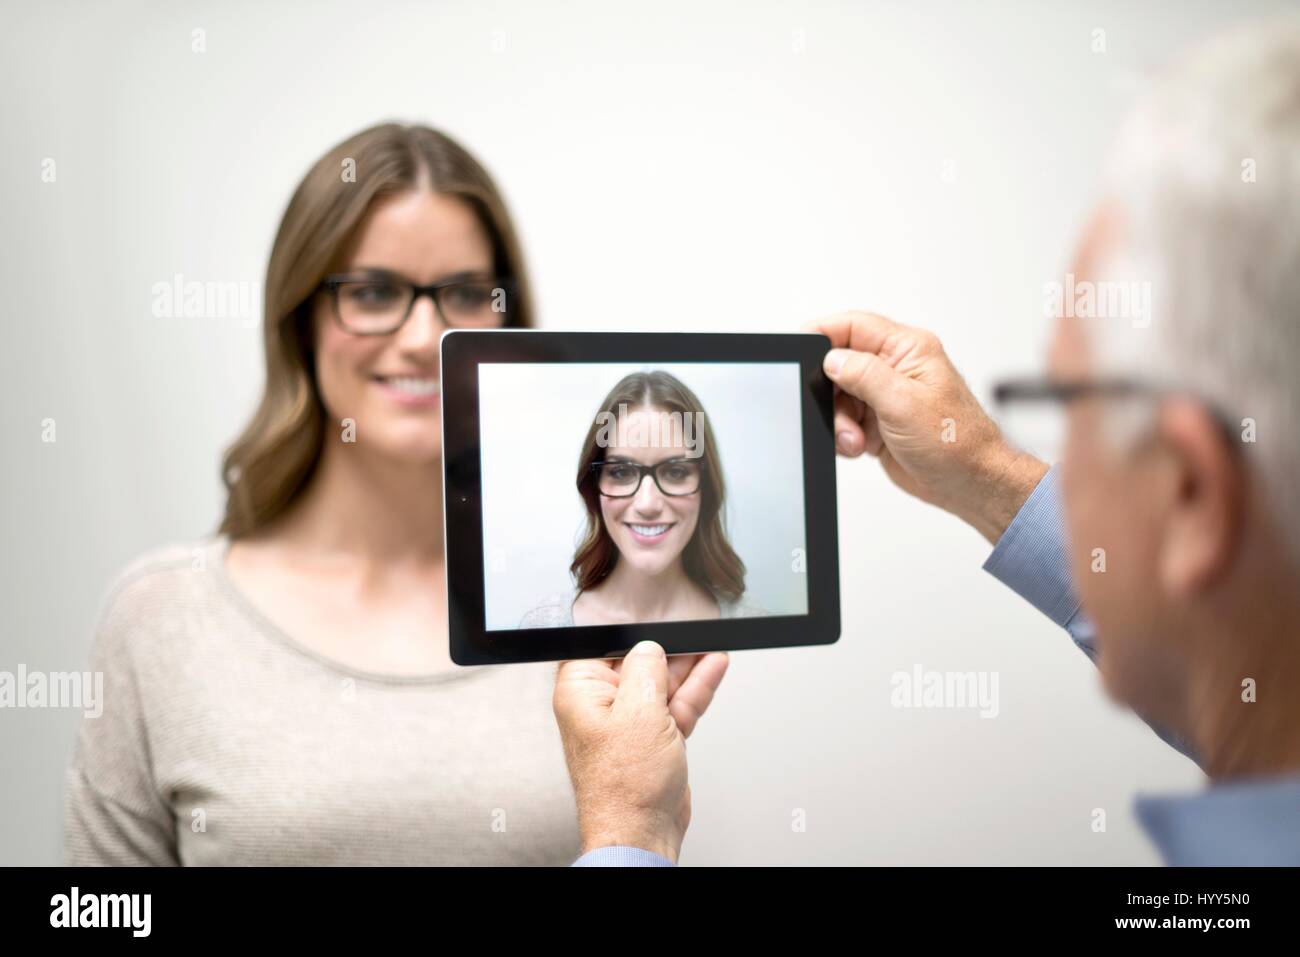 Man holding digital tablet in front of woman's face. Stock Photo